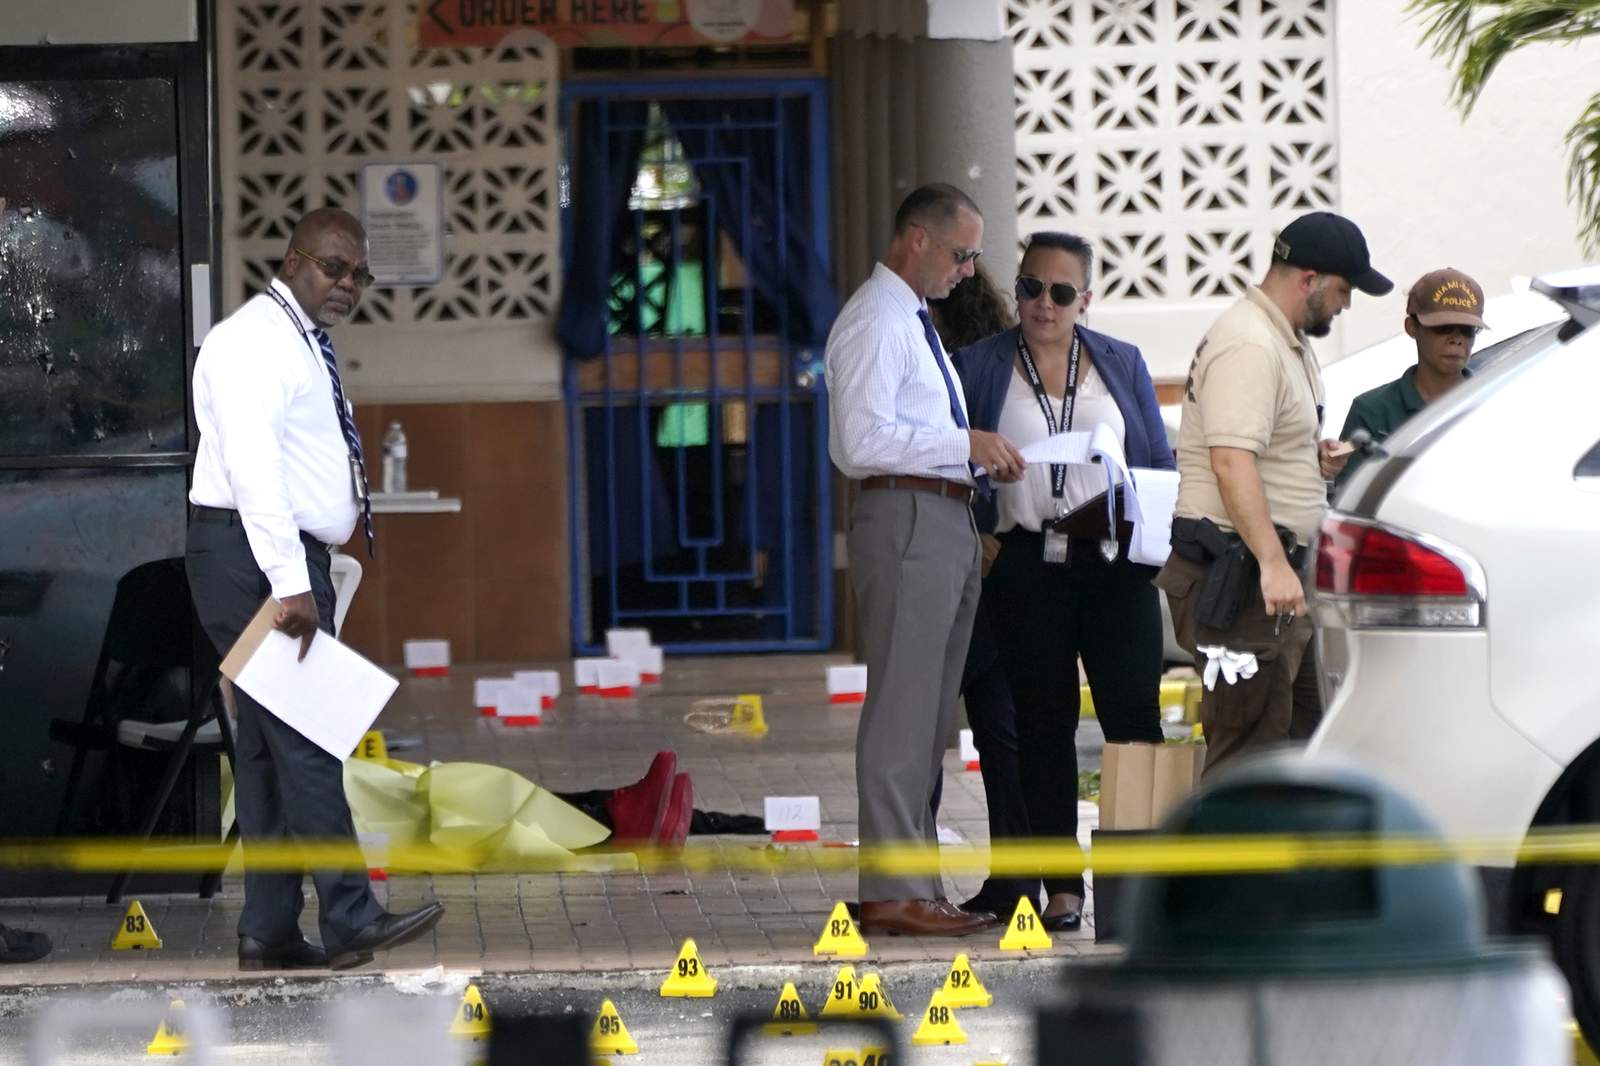 Law enforcement officials work the scene of a shooting outside a banquet hall, Sunday, in Miami-Dade County. (AP Photo/Lynne Sladky)